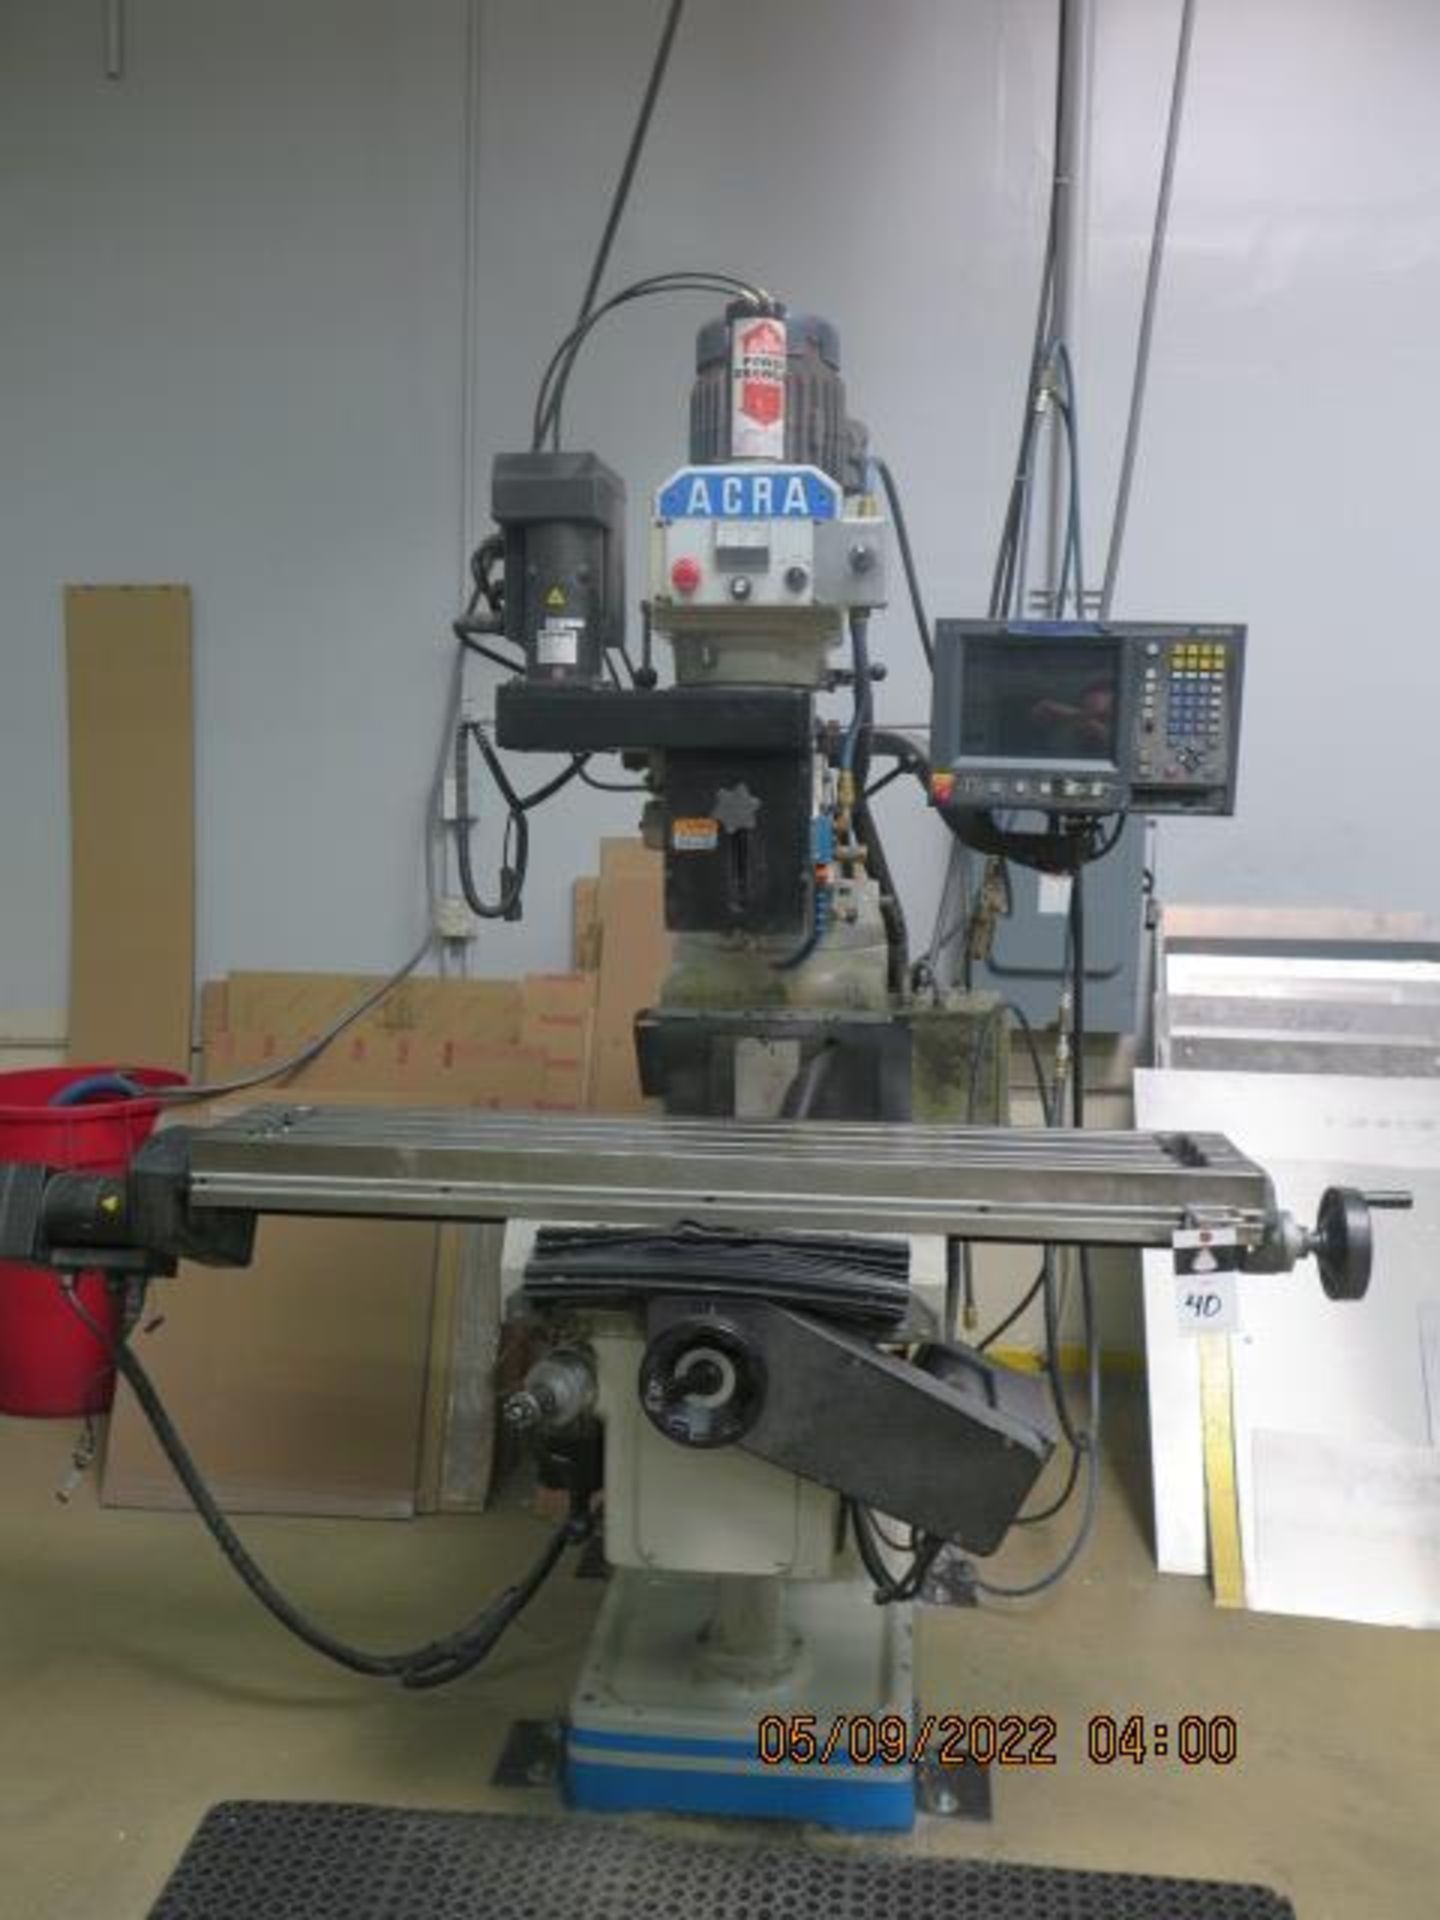 Acra AM3 VVA 3-Axis CNC Vertical Mill s/n 0602183 w/ Acu-Rite CNC, (HAS “Z” FAULT ERROR, SOLD AS IS